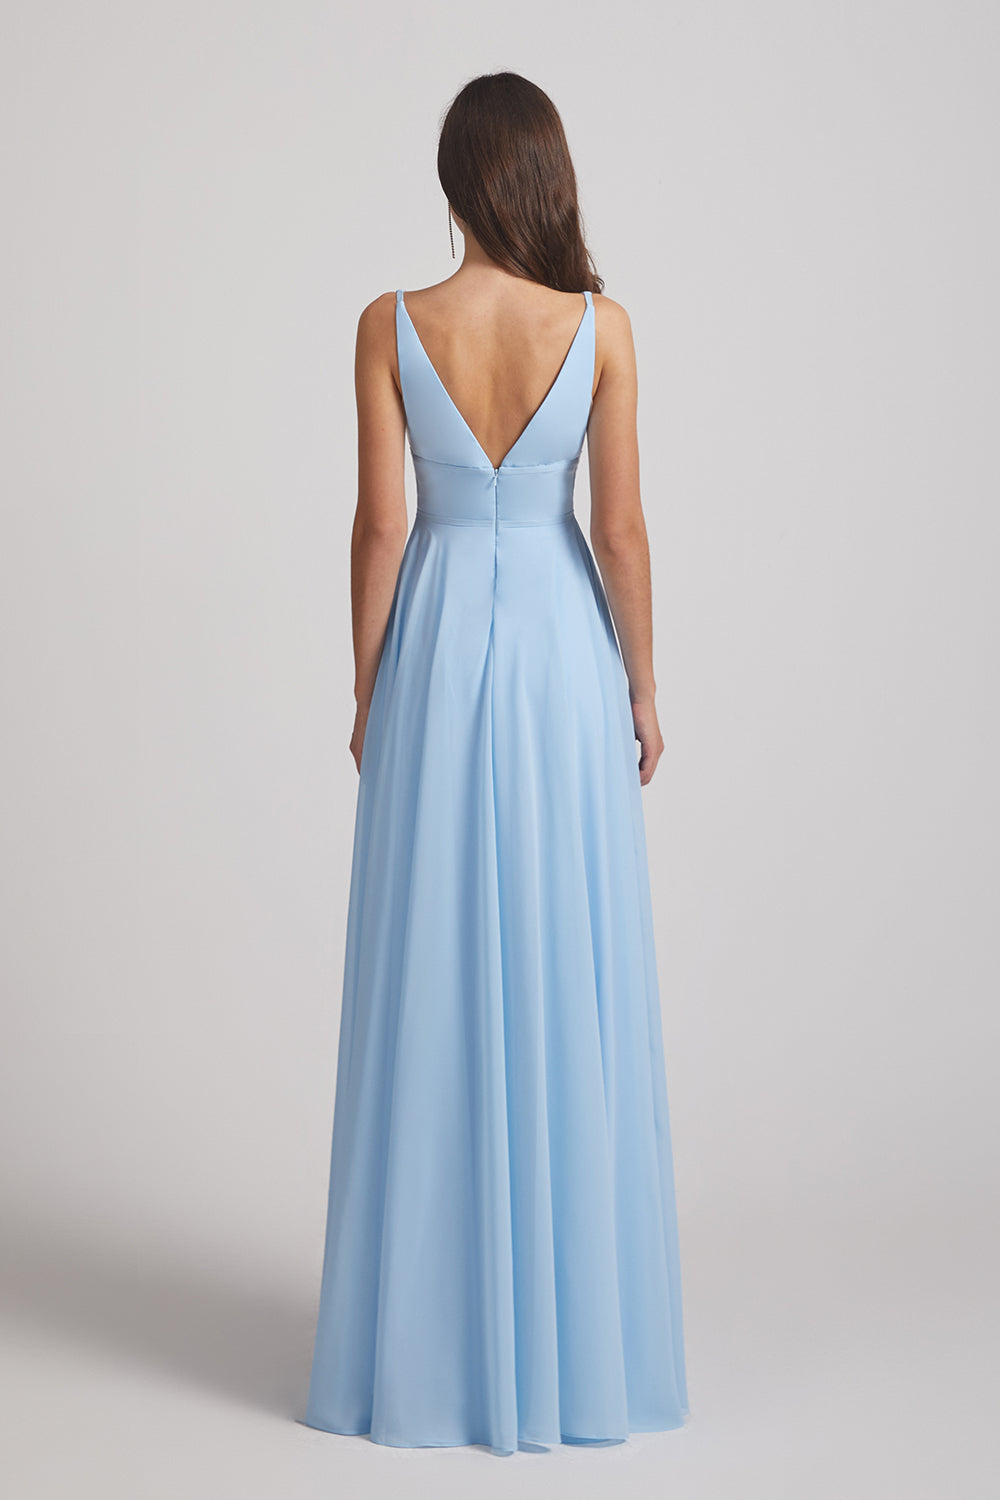 backless chiffon bridesmaid dress party gowns